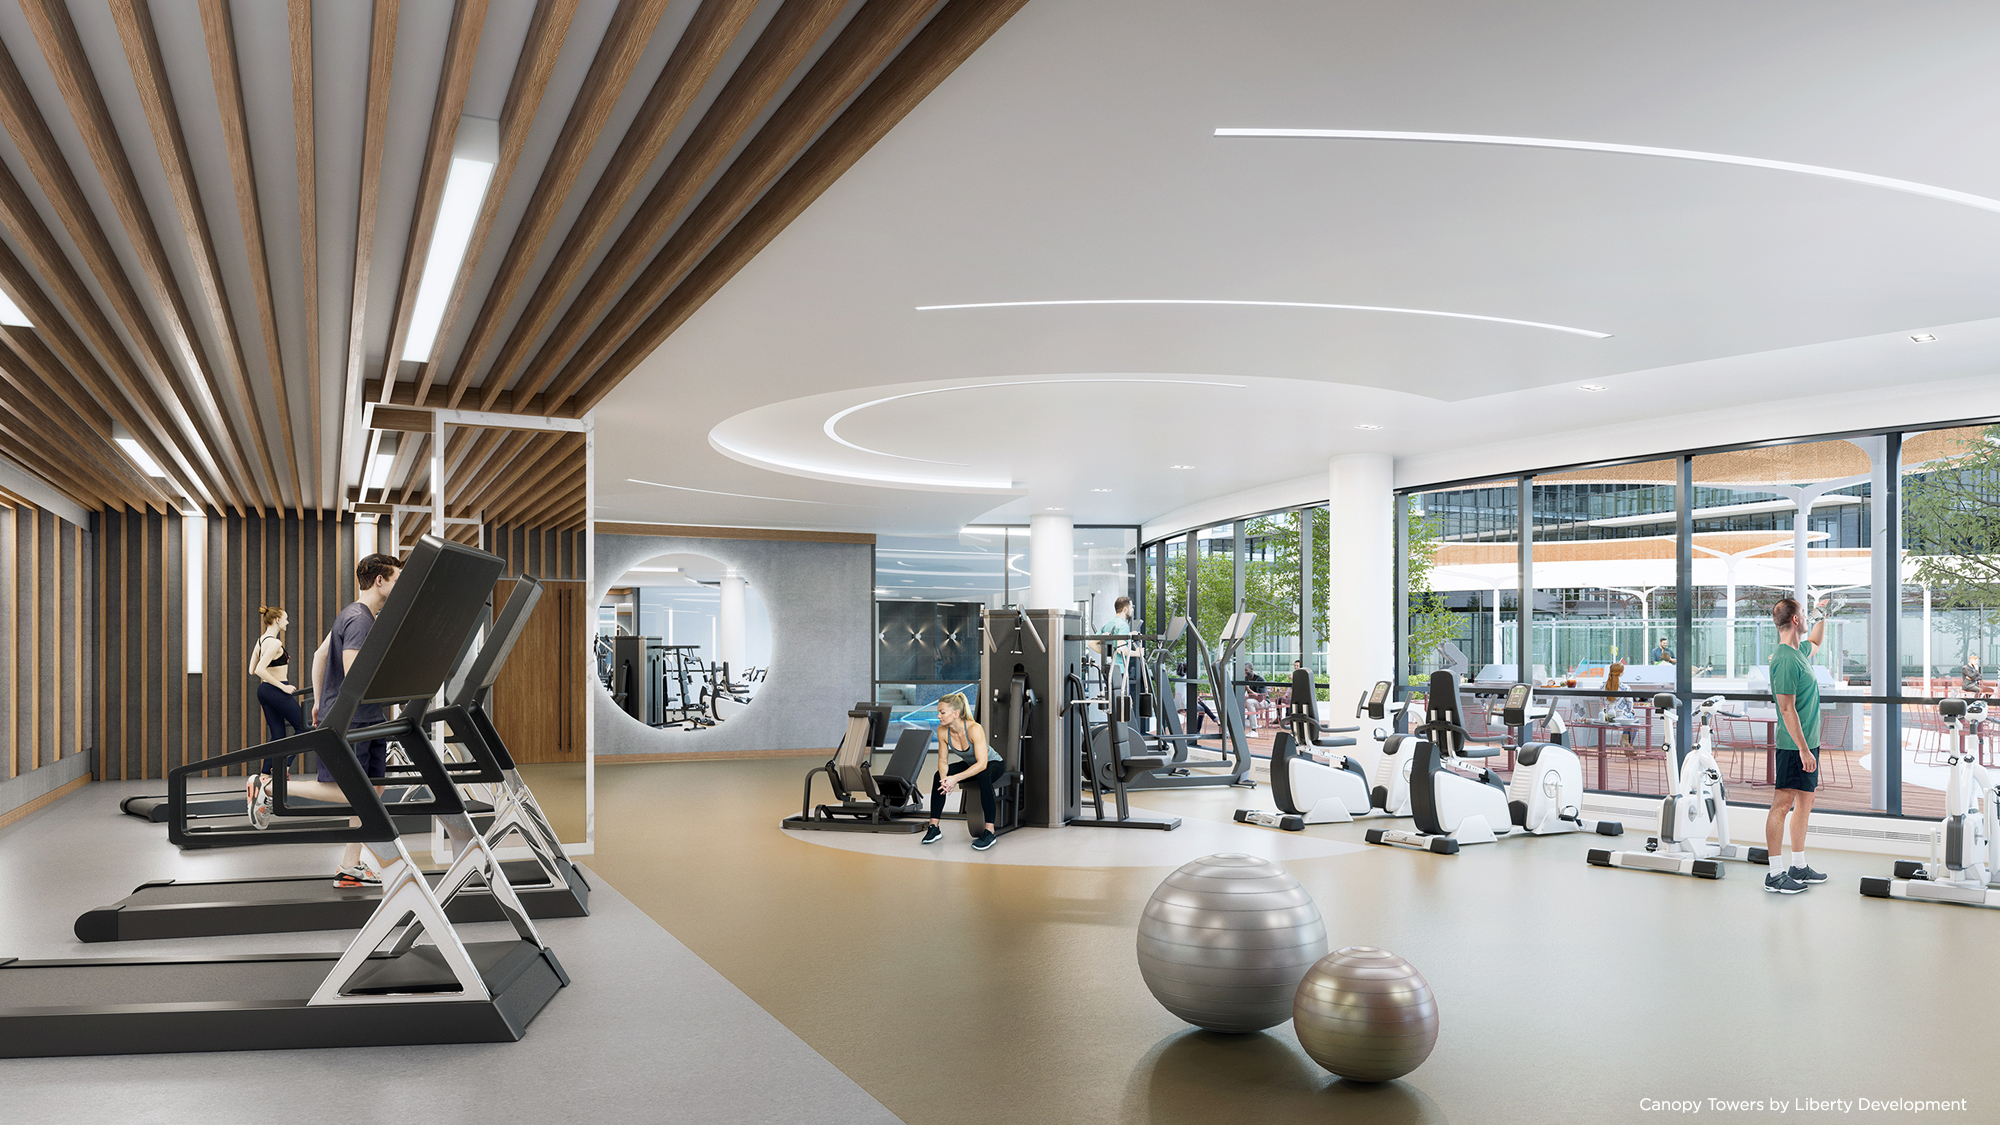 Canopy Towers - Exercise Room and Yoga Studio Rendering by Liberty Development